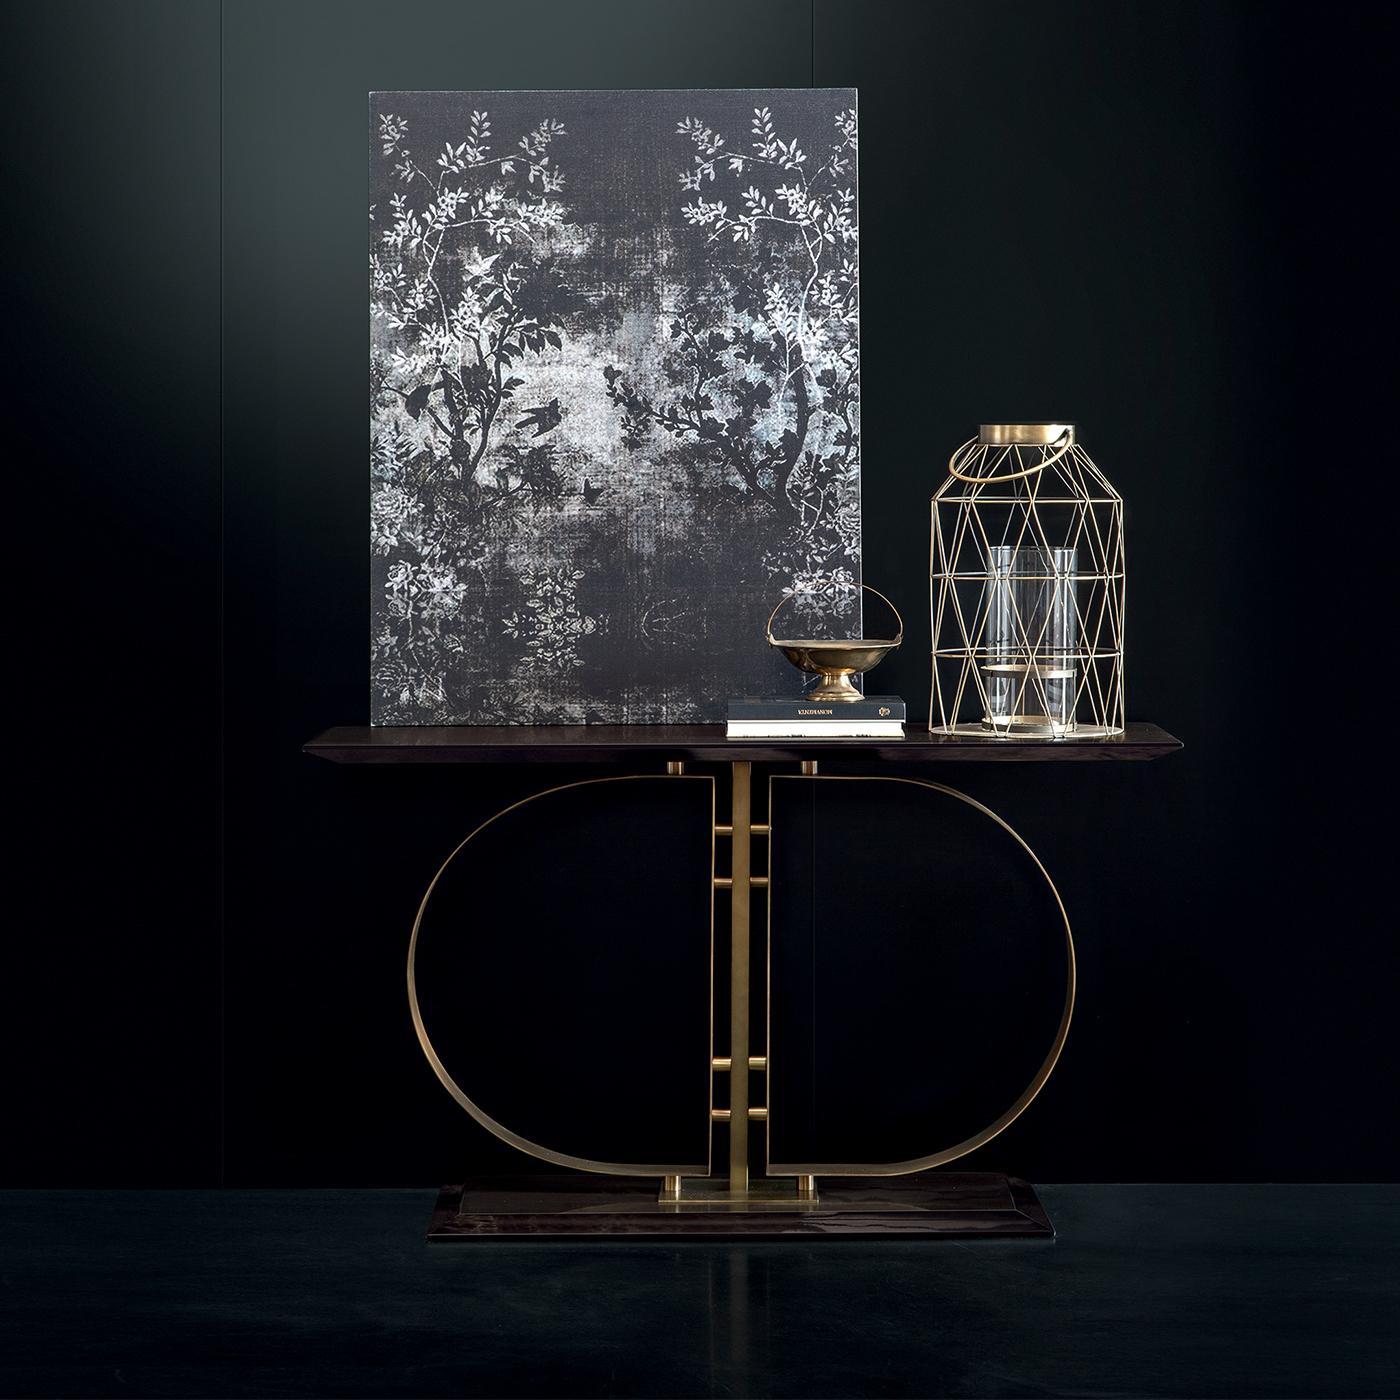 The Daytona logo takes center stage in this remarkable console. The rectangular top and base are made of plywood with a stunning smoky grey lacquered glossy finish. They stretch with a gracefully elongated silhouette to frame a visually striking